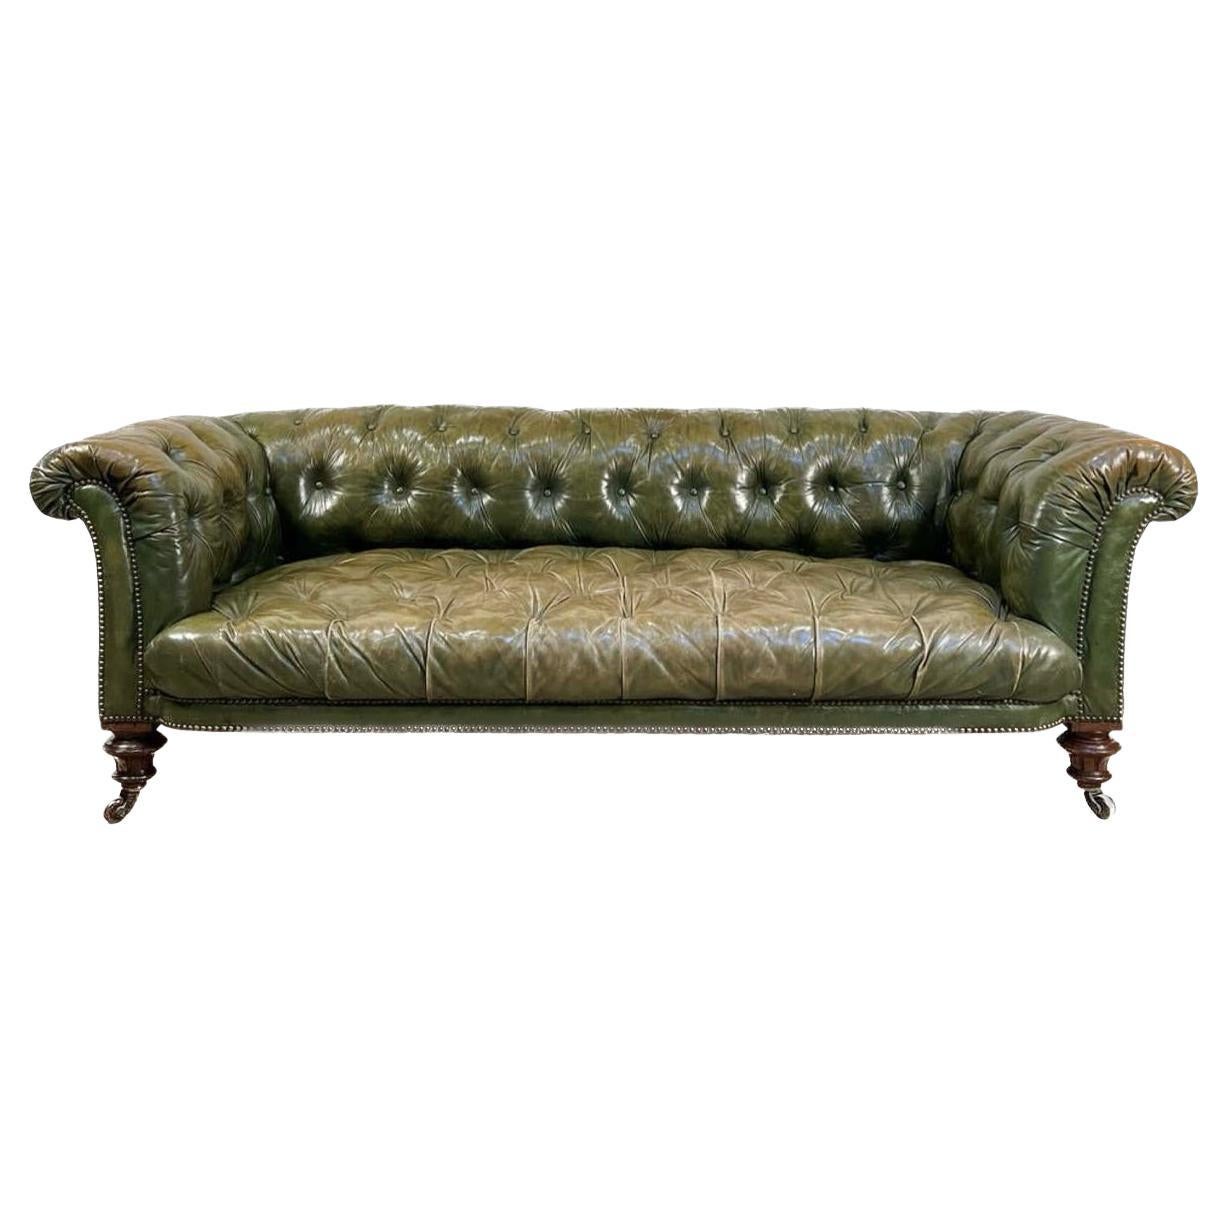 Early 19thC William IV Chesterfield Sofa in Beautiful Green Leathers For Sale